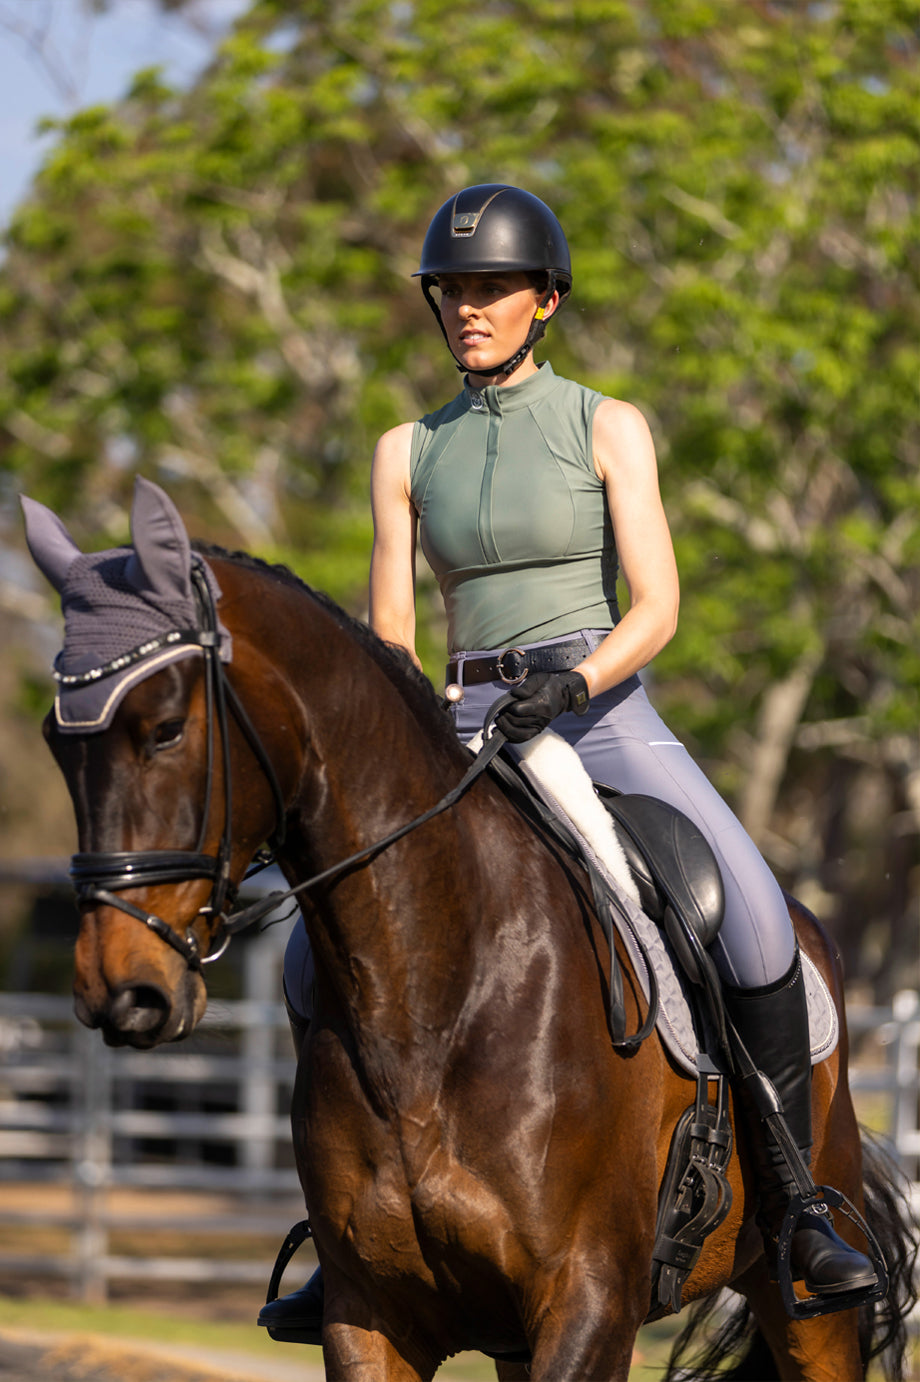 An image of a girl wearing the Sabi Equestrian Sleeveless Paradigm Design Base Layer in Viridescent Sage and the Sculpt Performance Hybrid Breeches in Silver Eclipse riding a brown horse